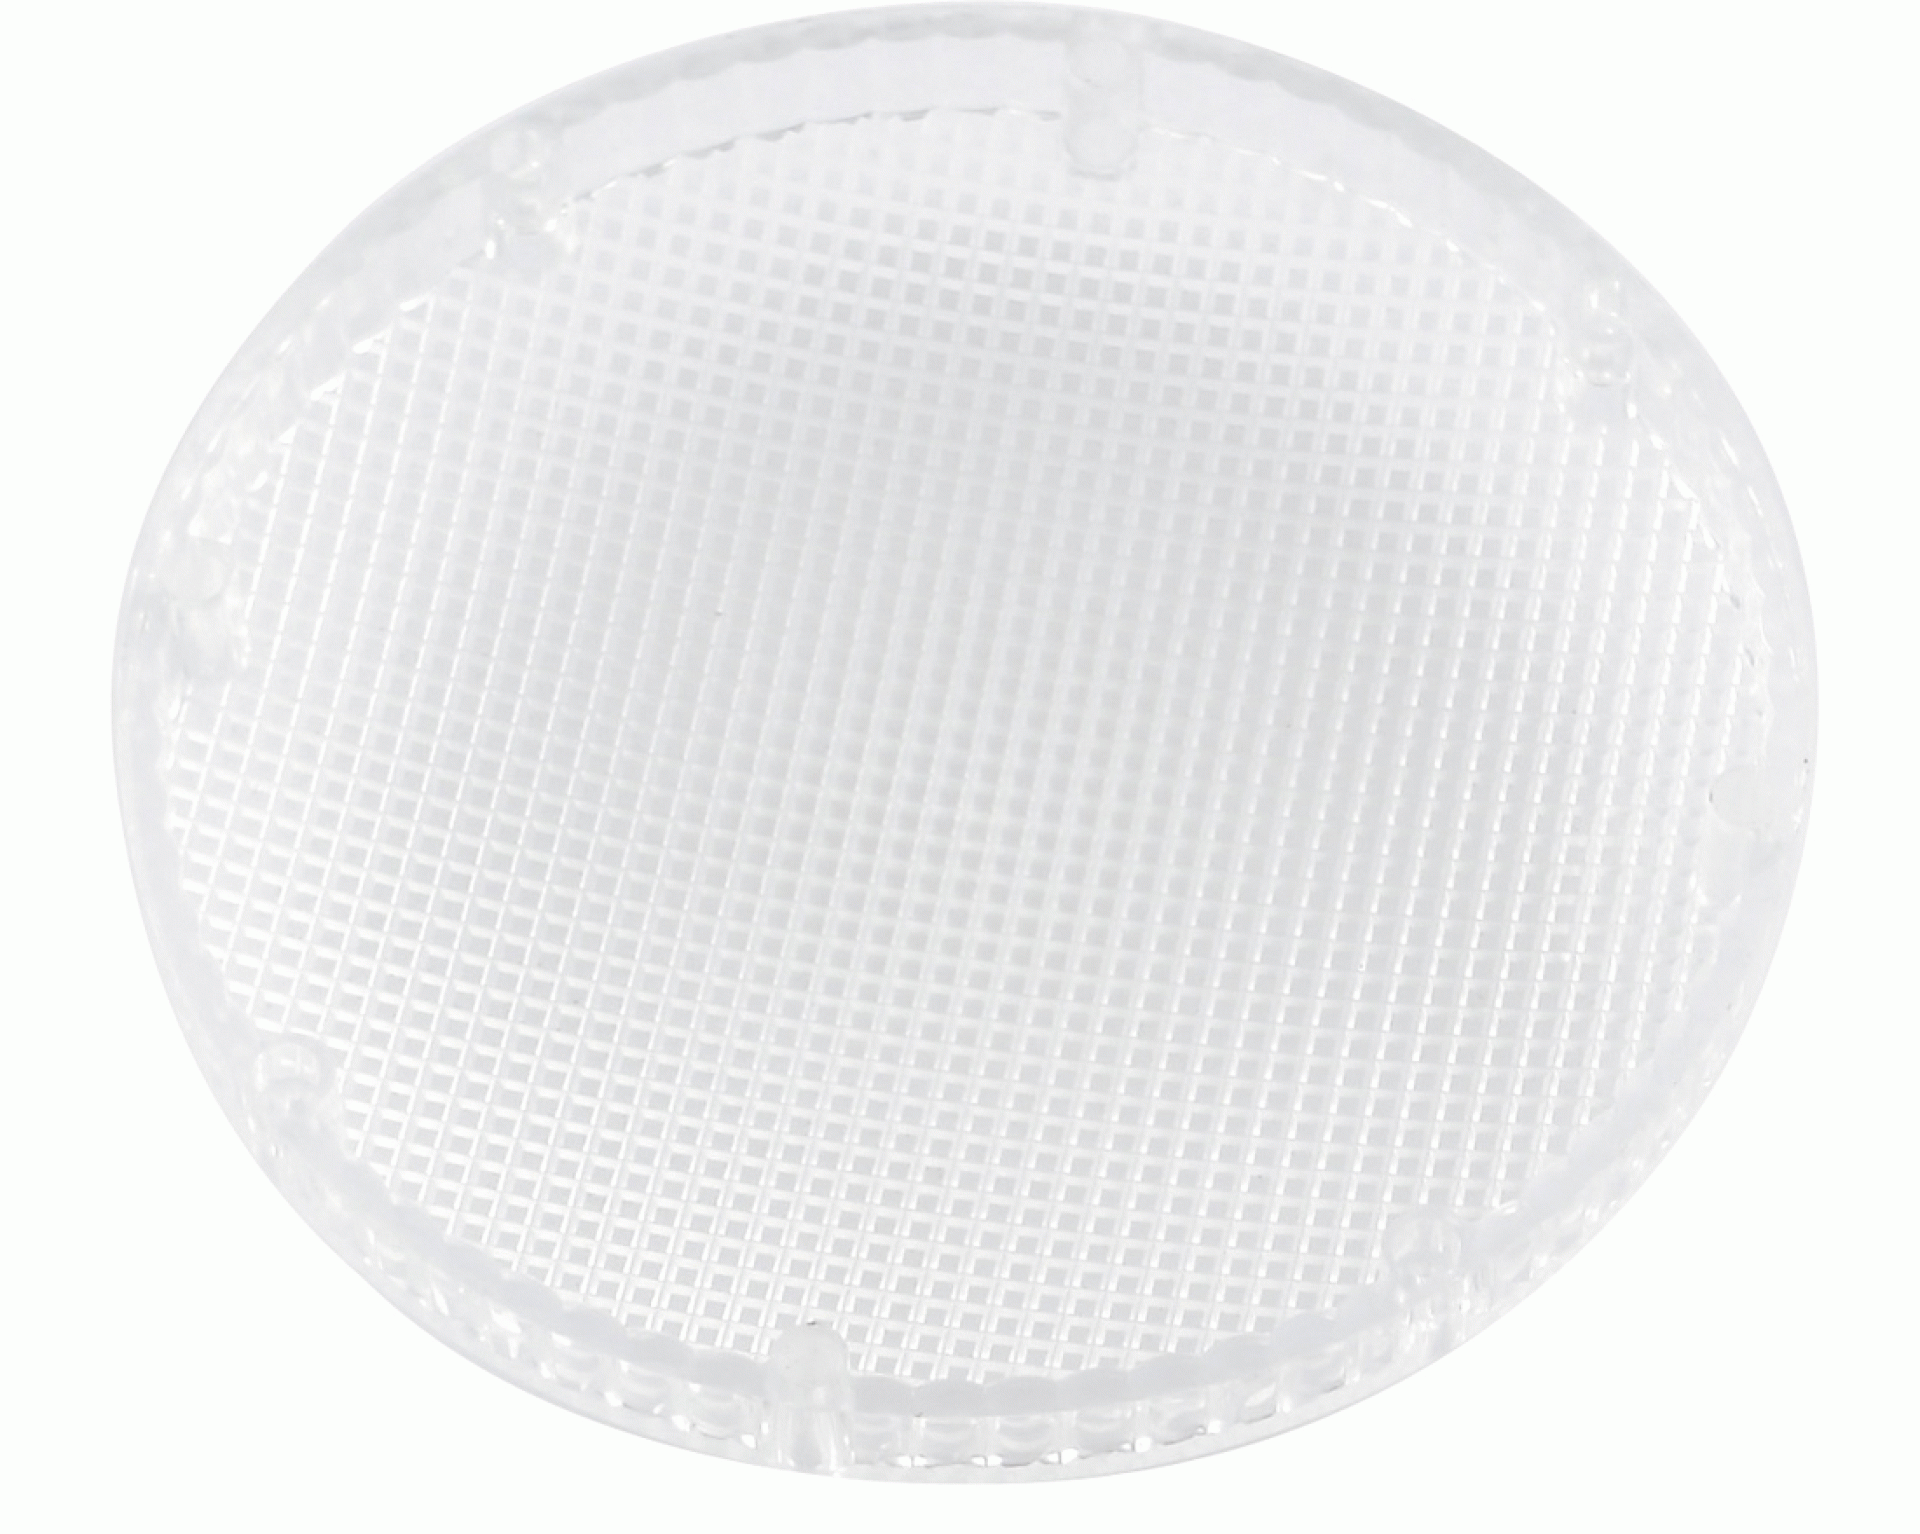 MINGS MARK INC. | 9090129 | Clear Replacement Lens For LED Dome Light